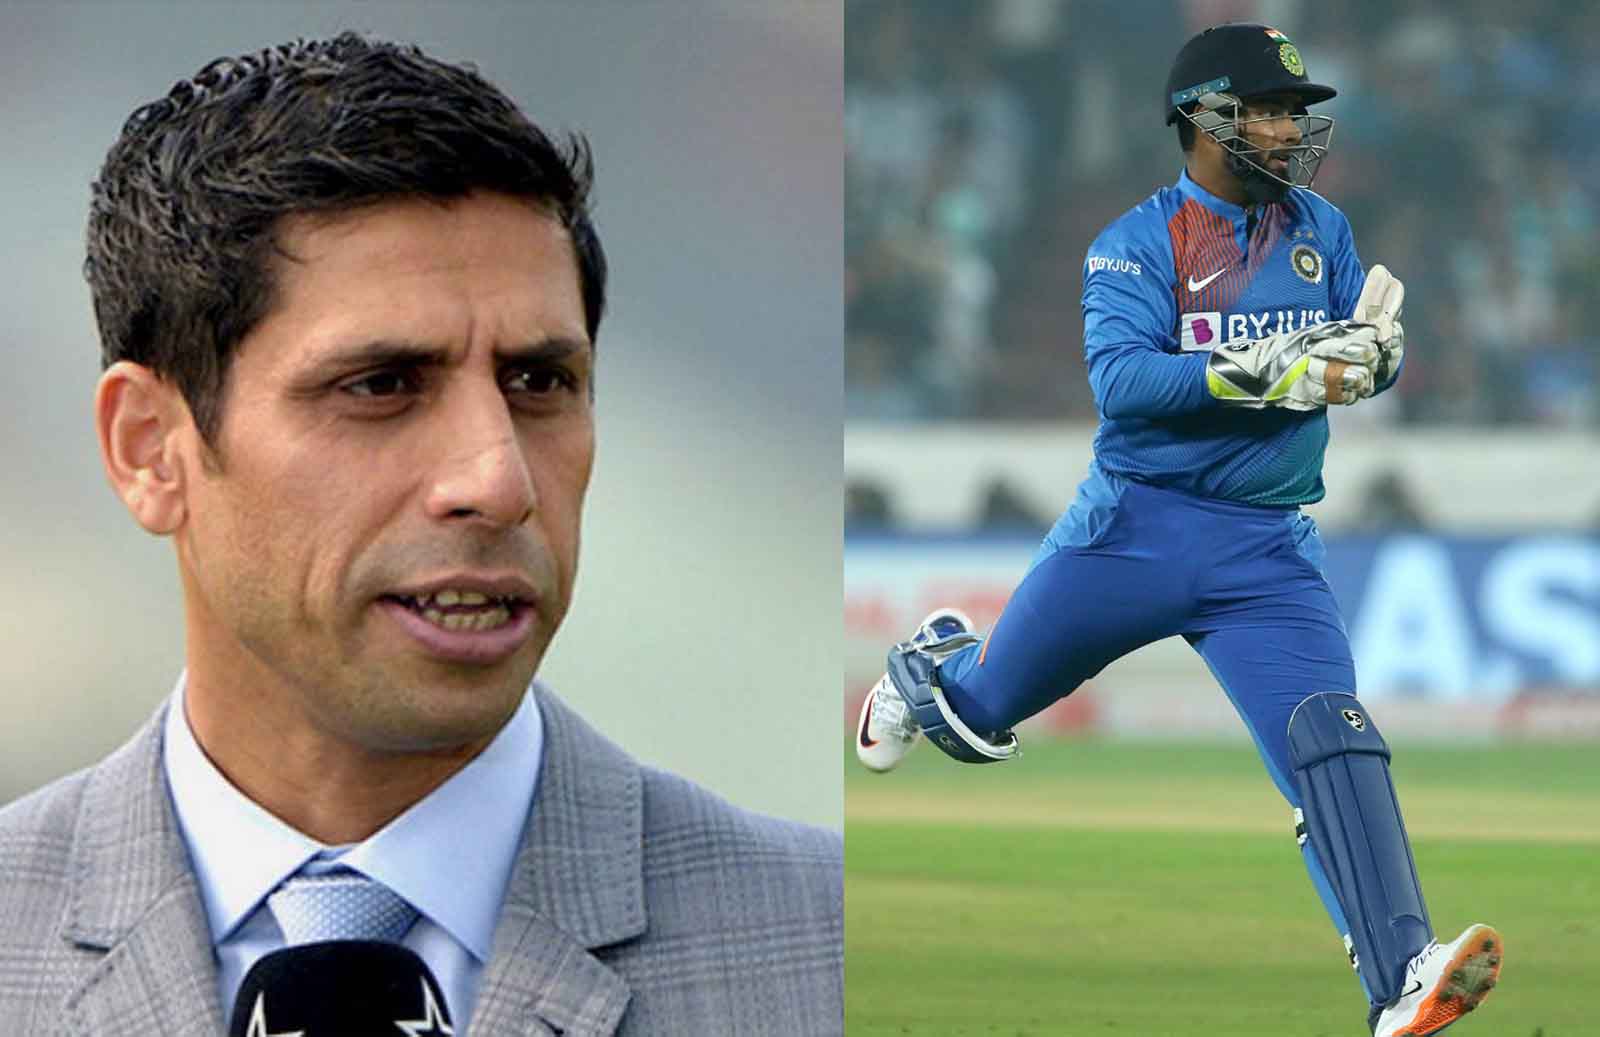 Rishabh Pant perfect replacement for MS Dhoni in Team India: Ashish Nehra